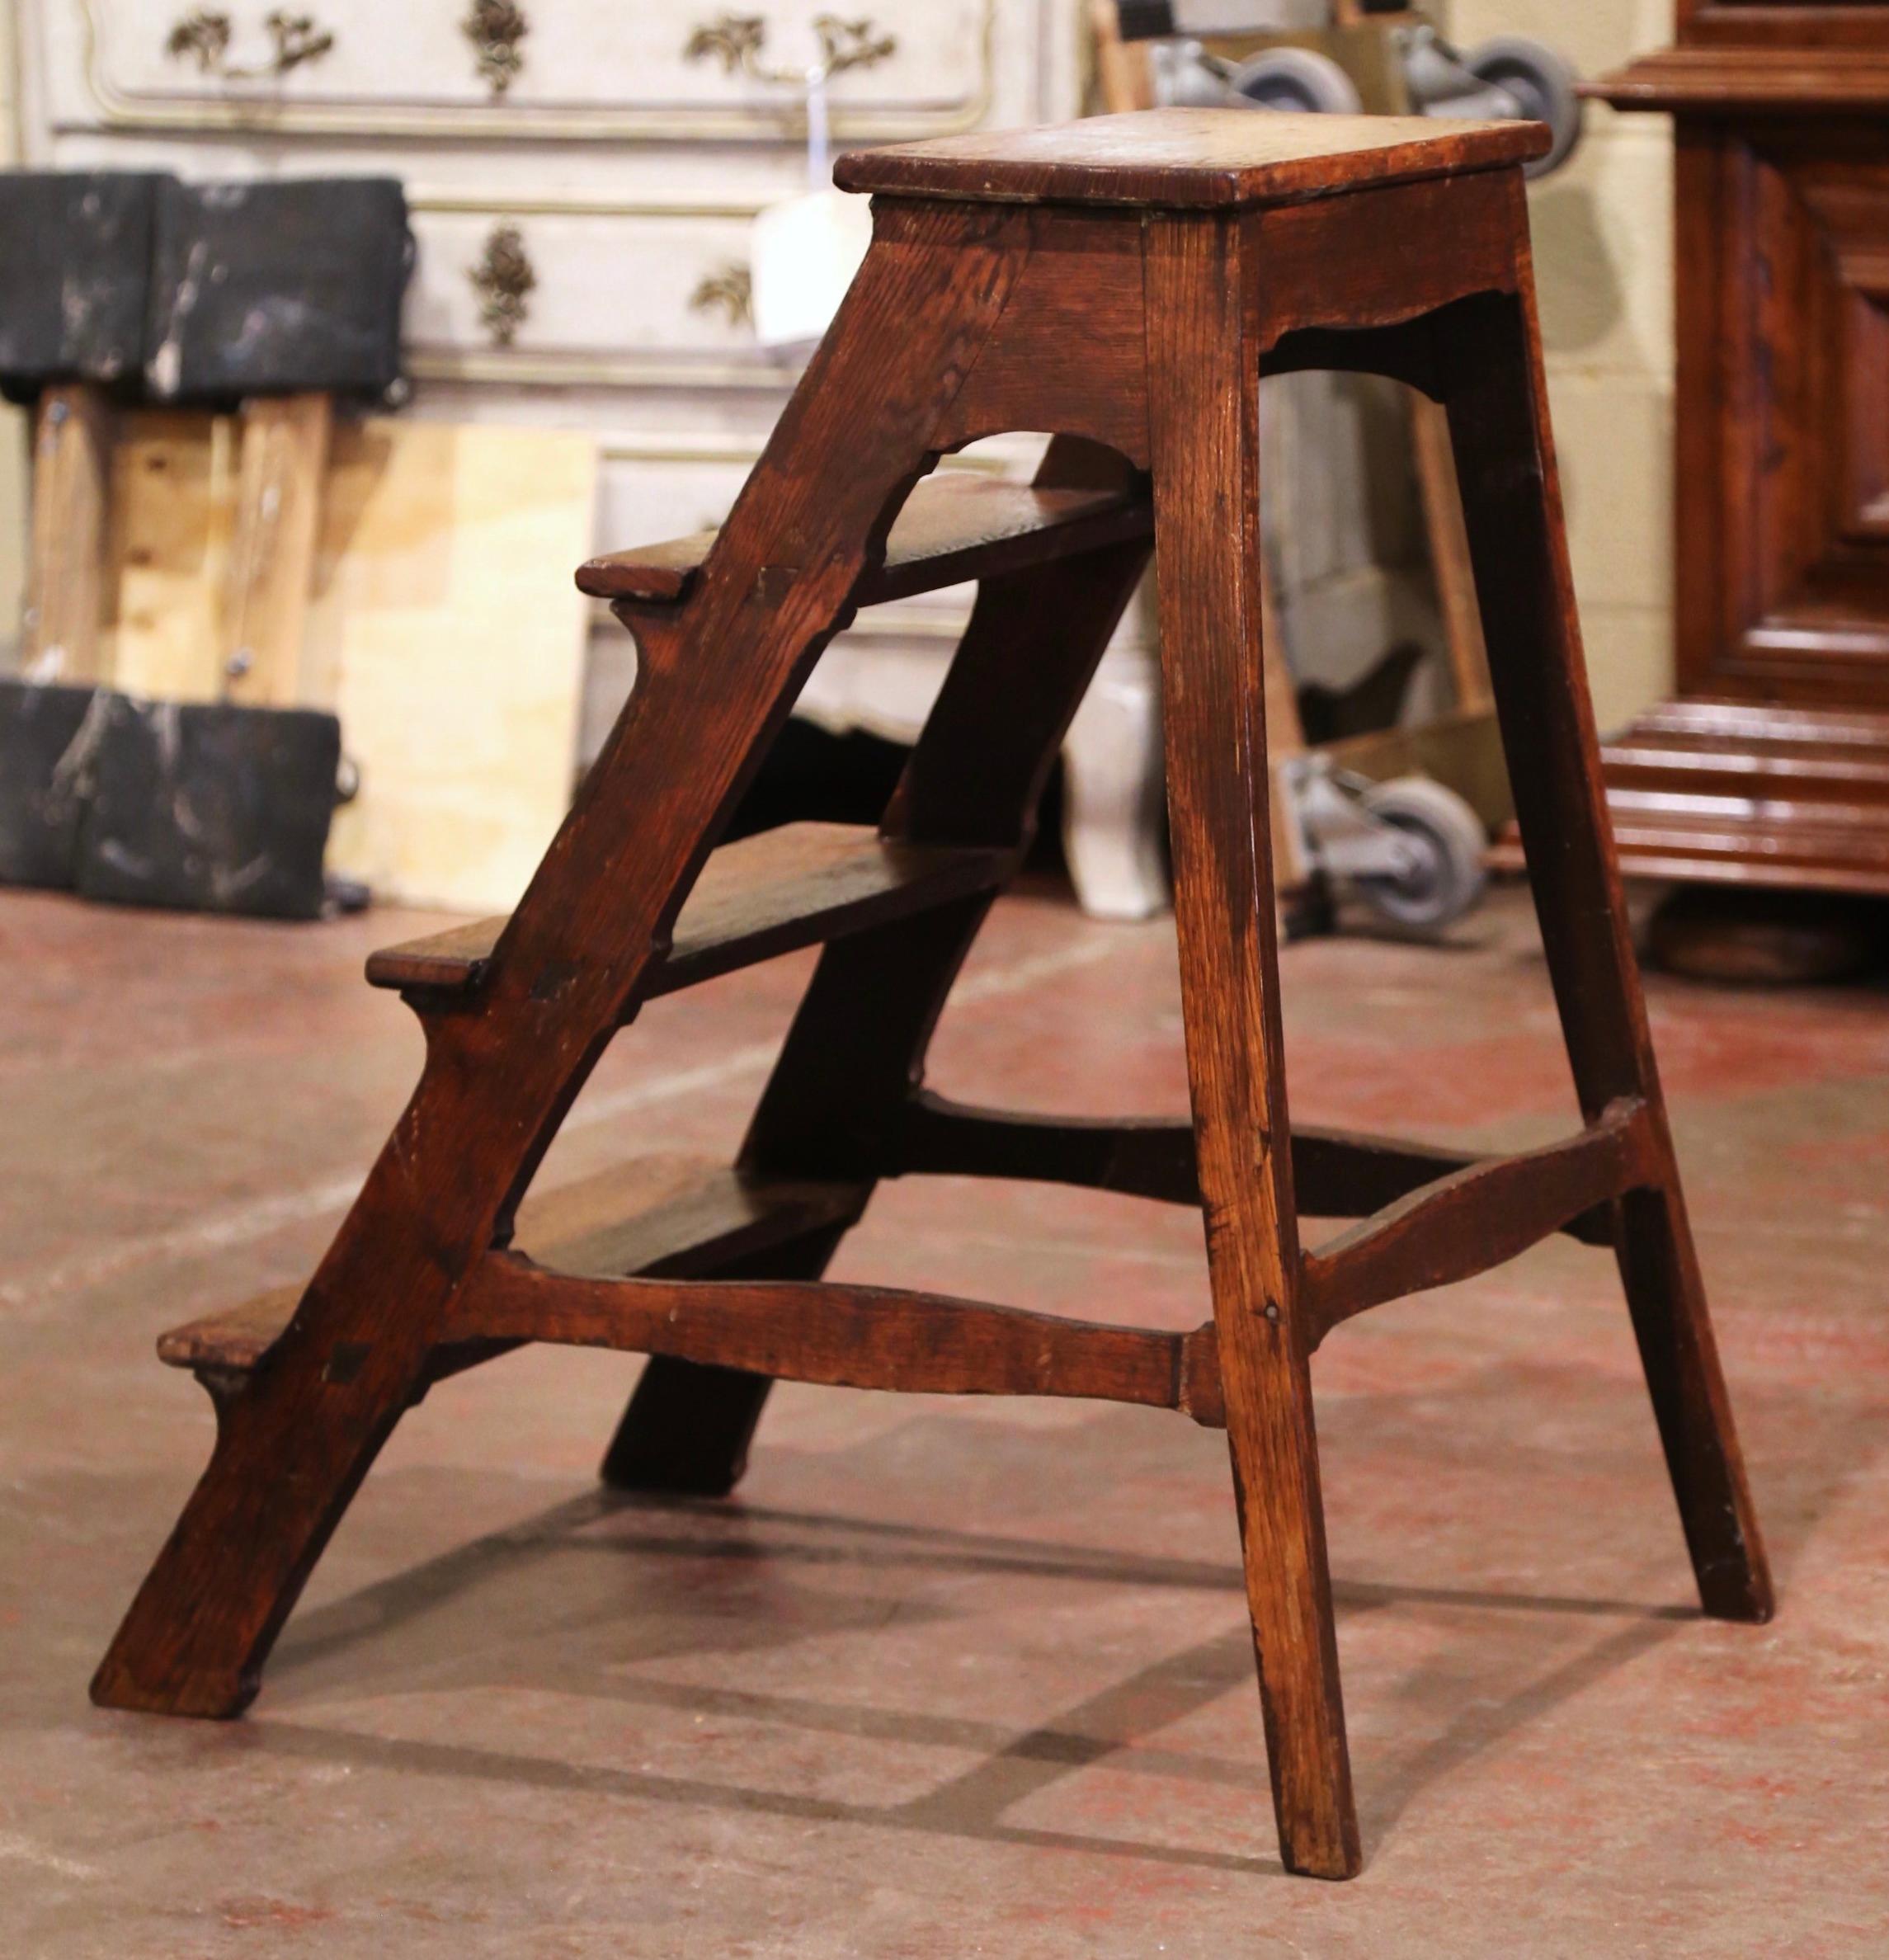 Rustic Mid-19th Century French Country Carved Oak Library Step Ladder